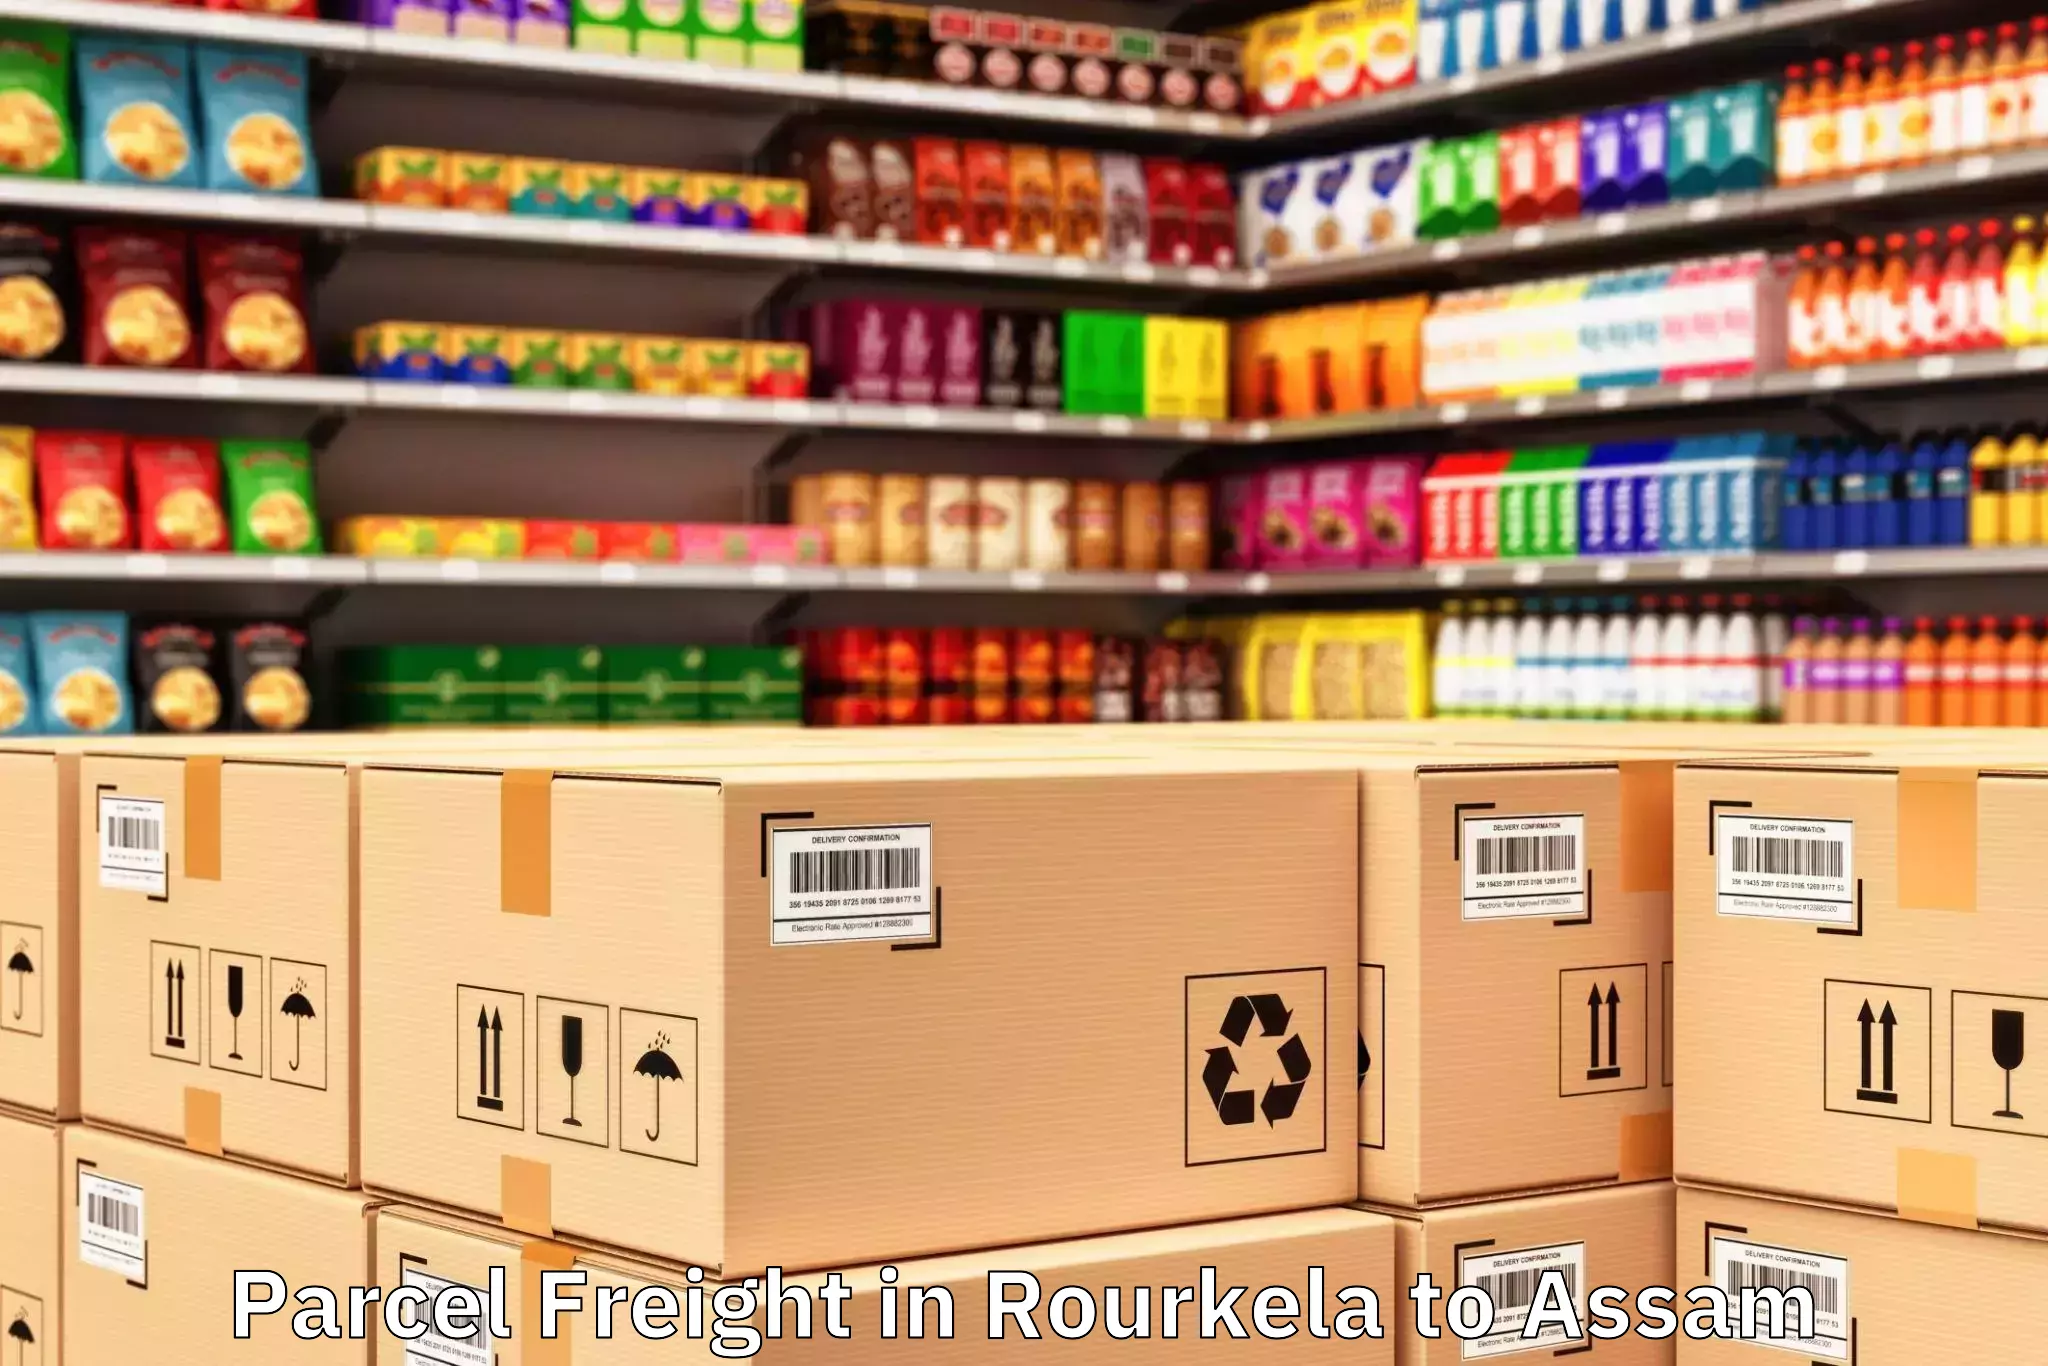 Efficient Rourkela to Mayang Parcel Freight